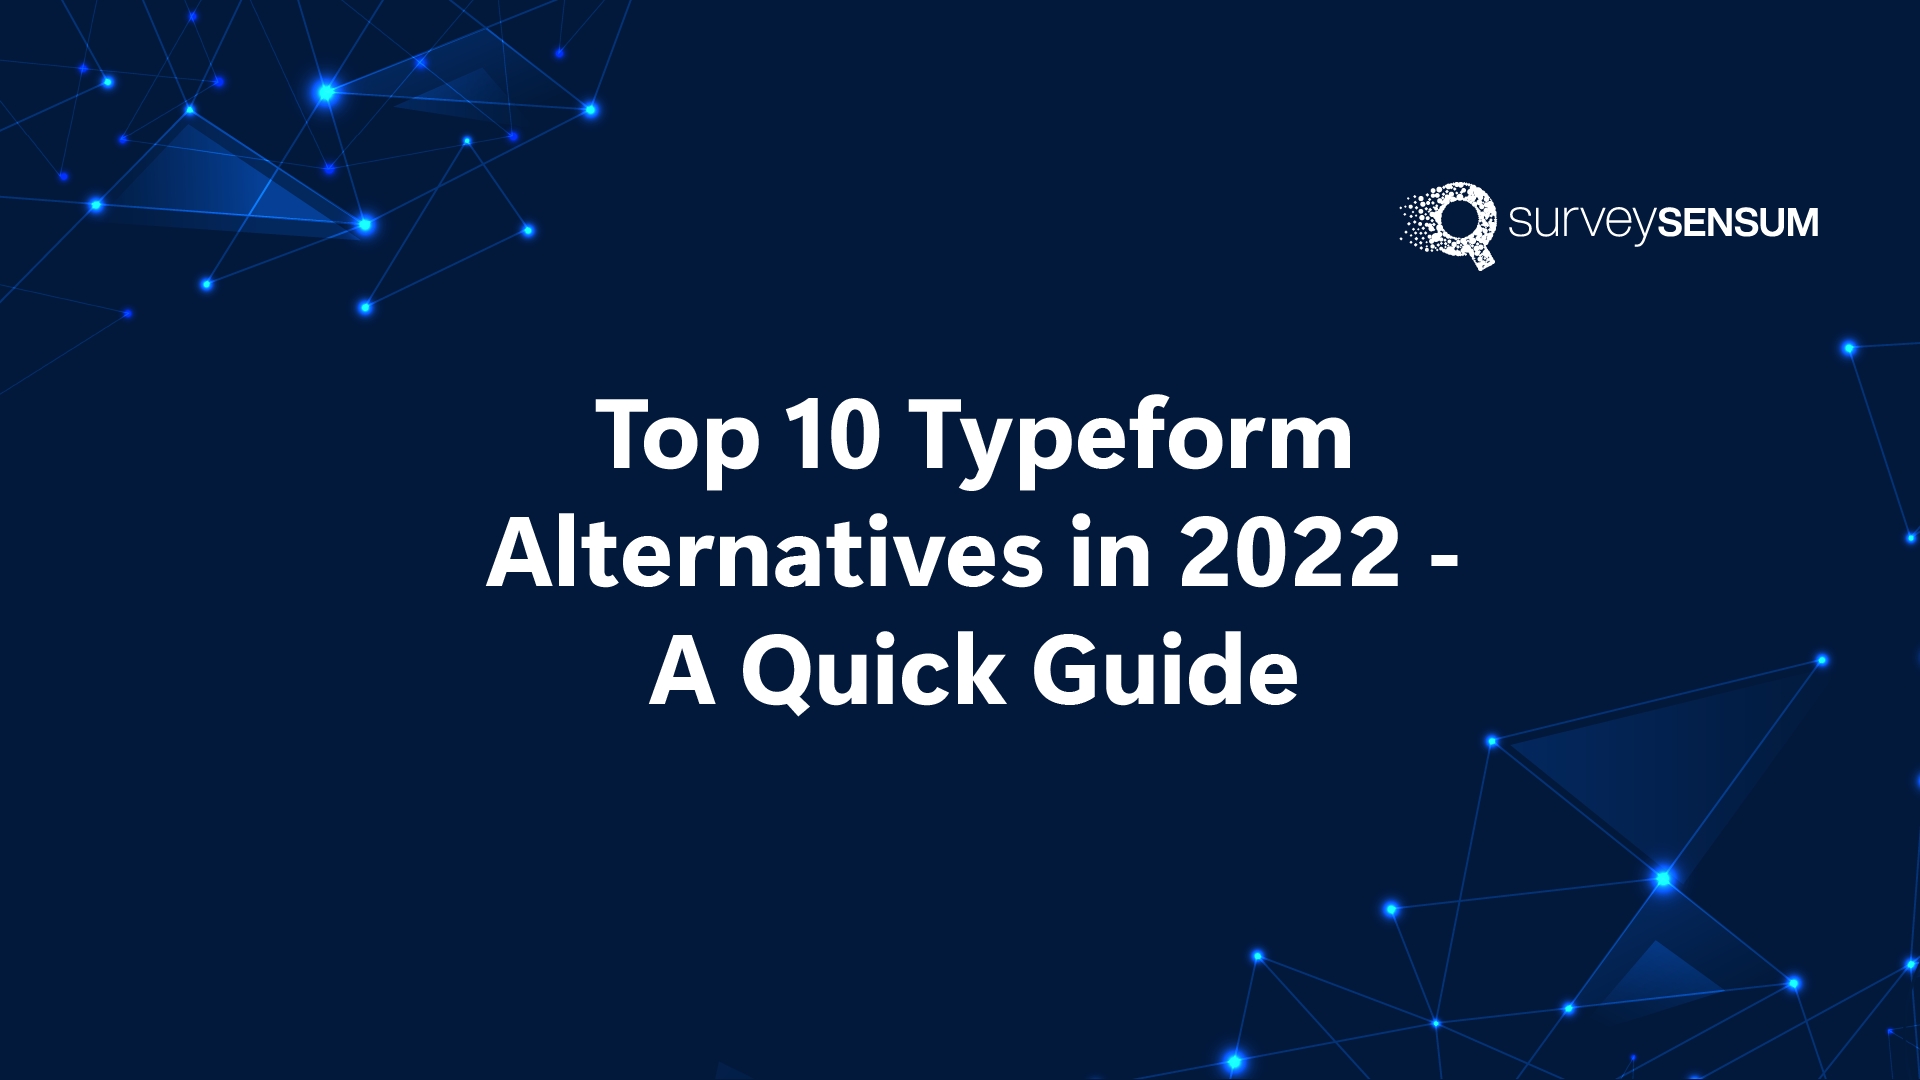 Top 10 Typeform Alternatives in 2022 - A Quick Guide